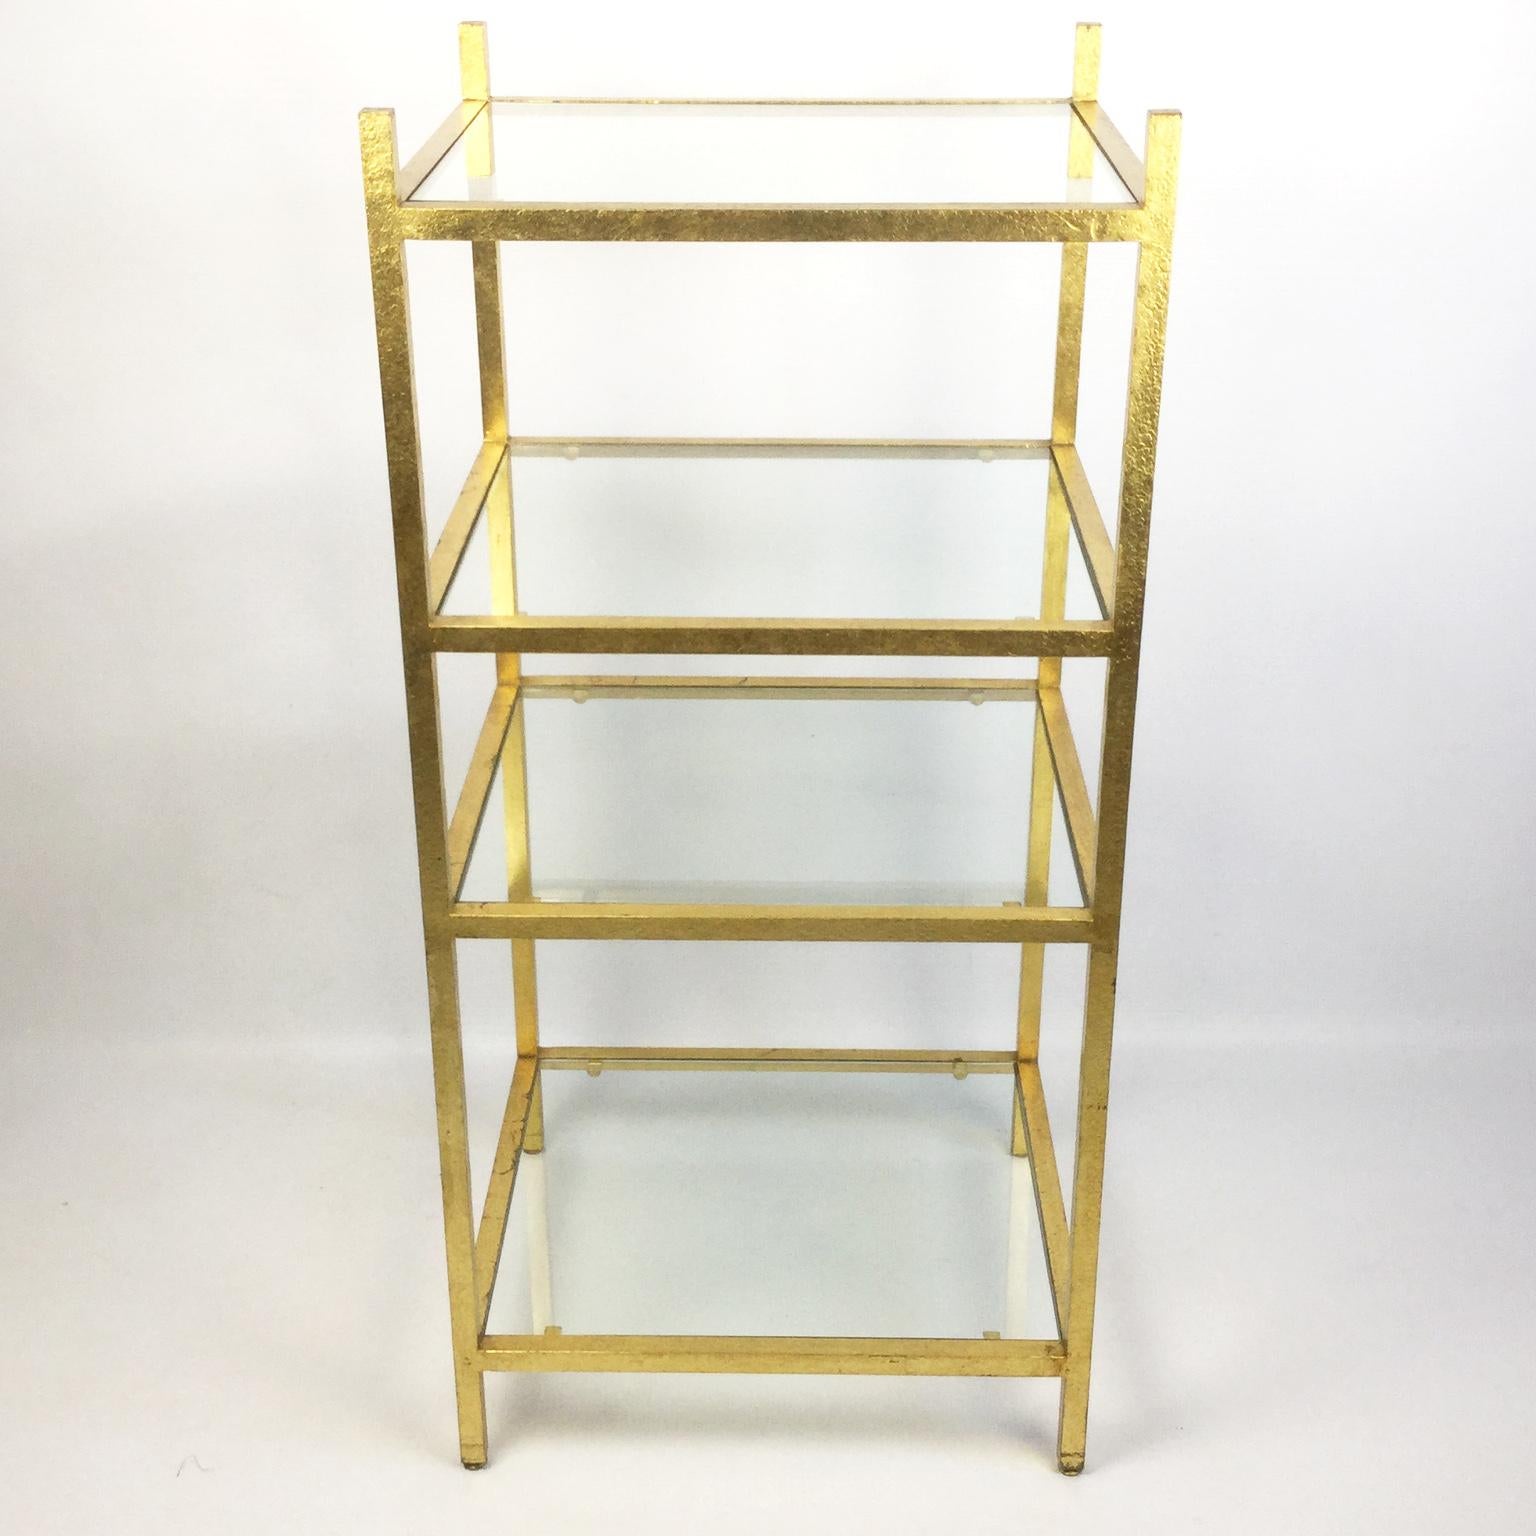 Neoclassical French gilded shelf from the midcentury, by the decorators and designers Roger and Robert Thibier from 1960s
The frame is composed of wrought iron legs gilded with gold leaf and four adjustable feet.
Original and good condition